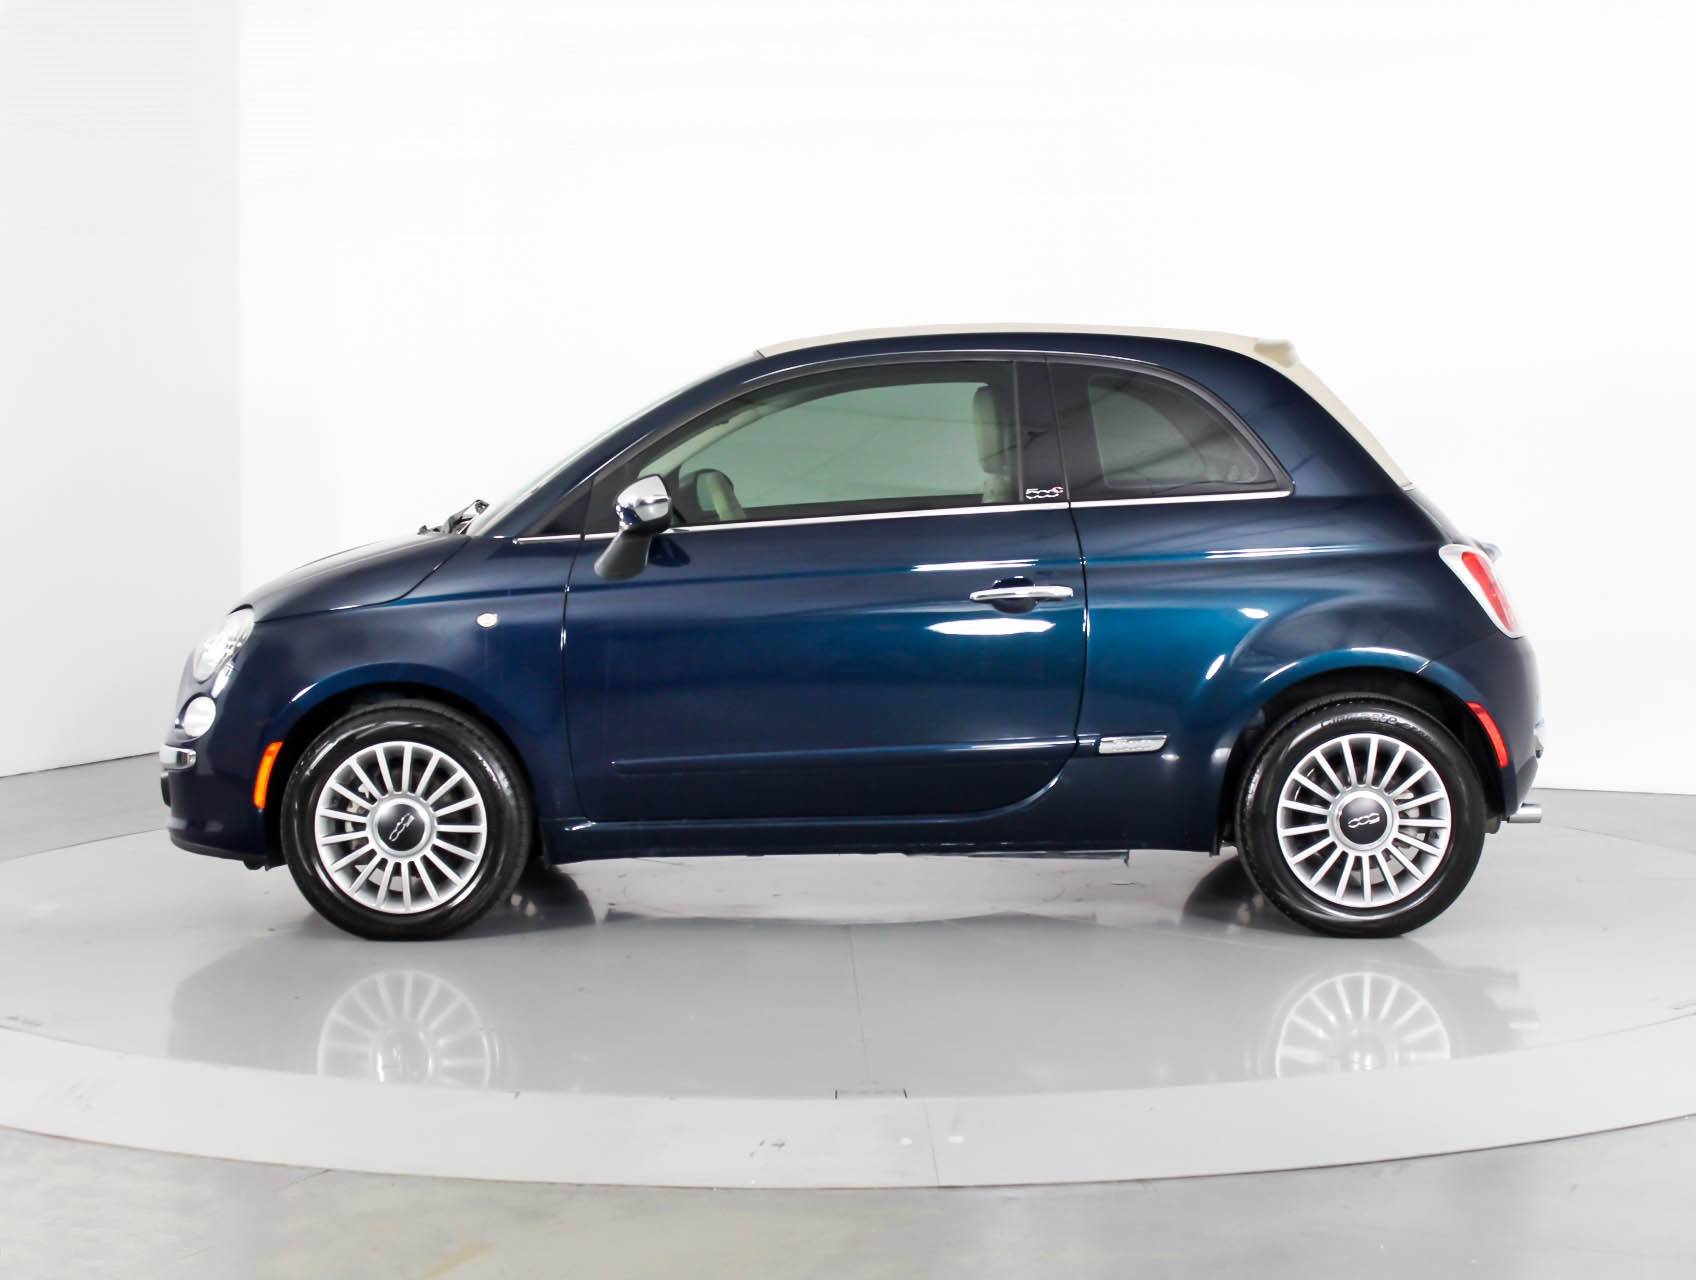 Used 2013 FIAT 500C LOUNGE for sale in MIAMI | 88579